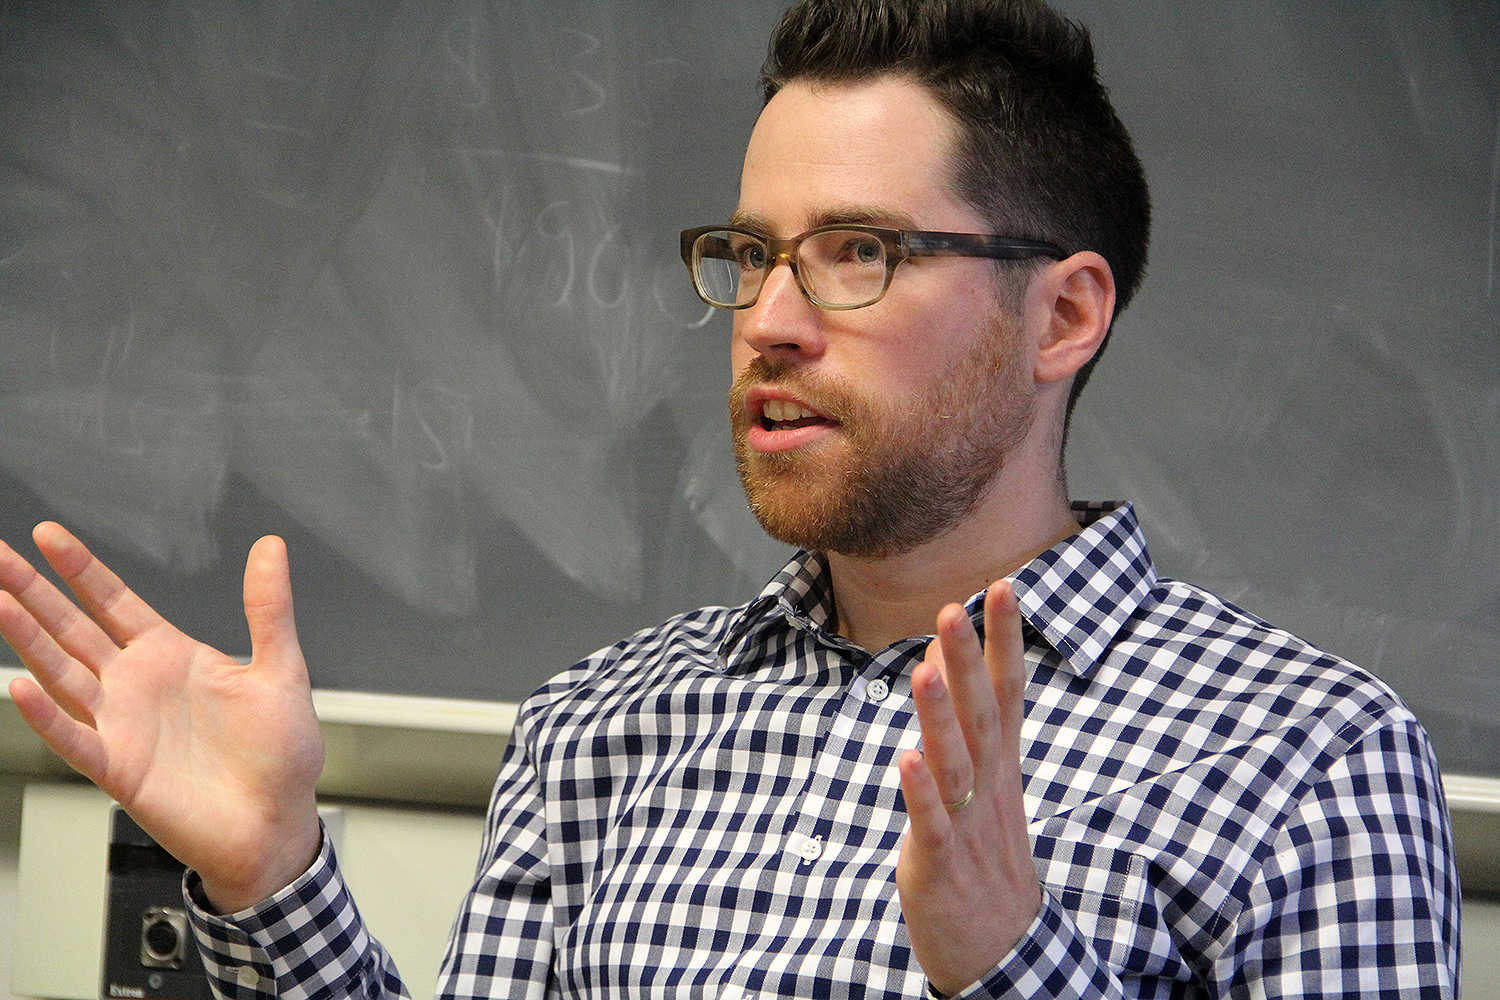 Visiting Professor of Government Sam Rosenfeld explored the consequences of ideological polarization among political parties on contemporary primaries. Citing the campaigns of Bernie Sanders and Donald Trump, Rosenfeld explained how recent candidates have appealed more to their party's ideological base rather than to swing voters.